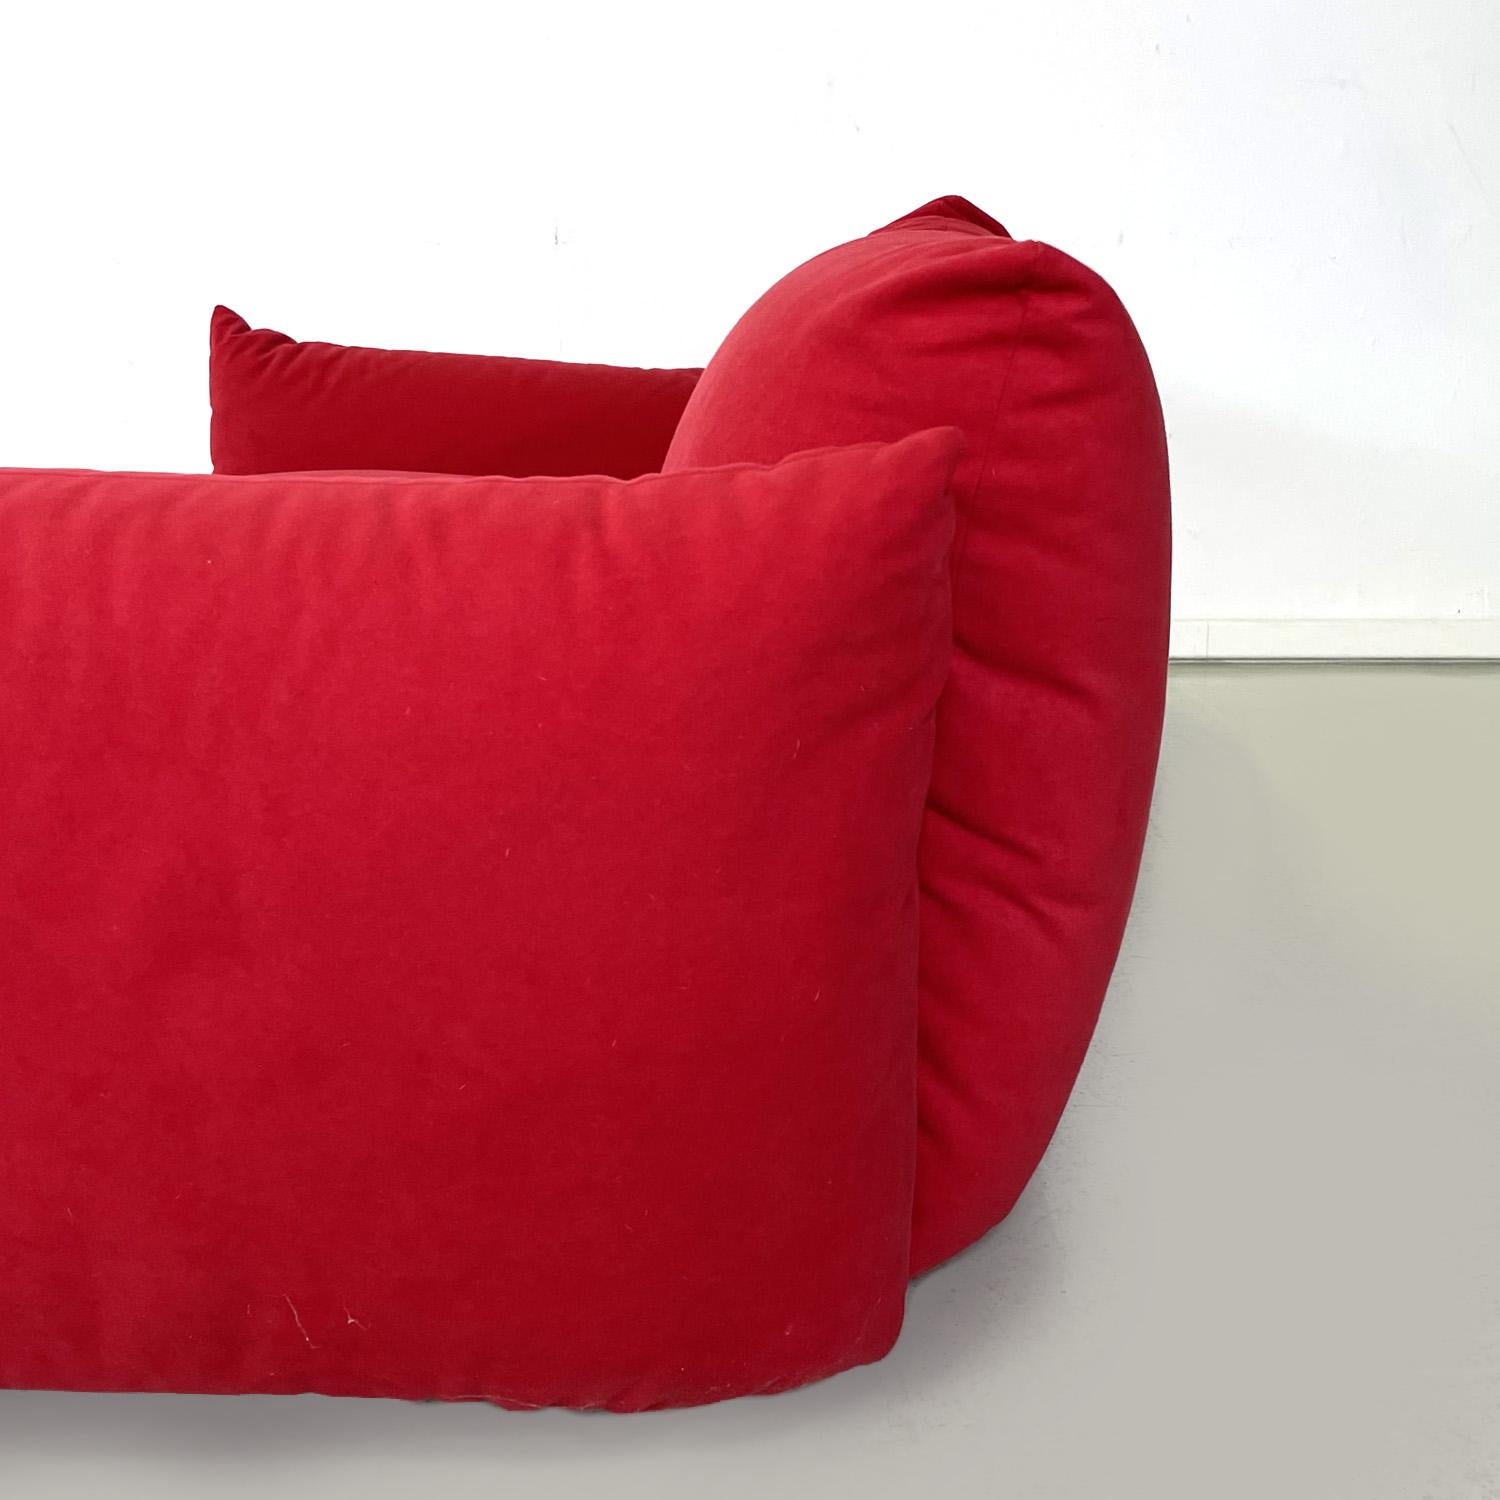 jeffy red couch